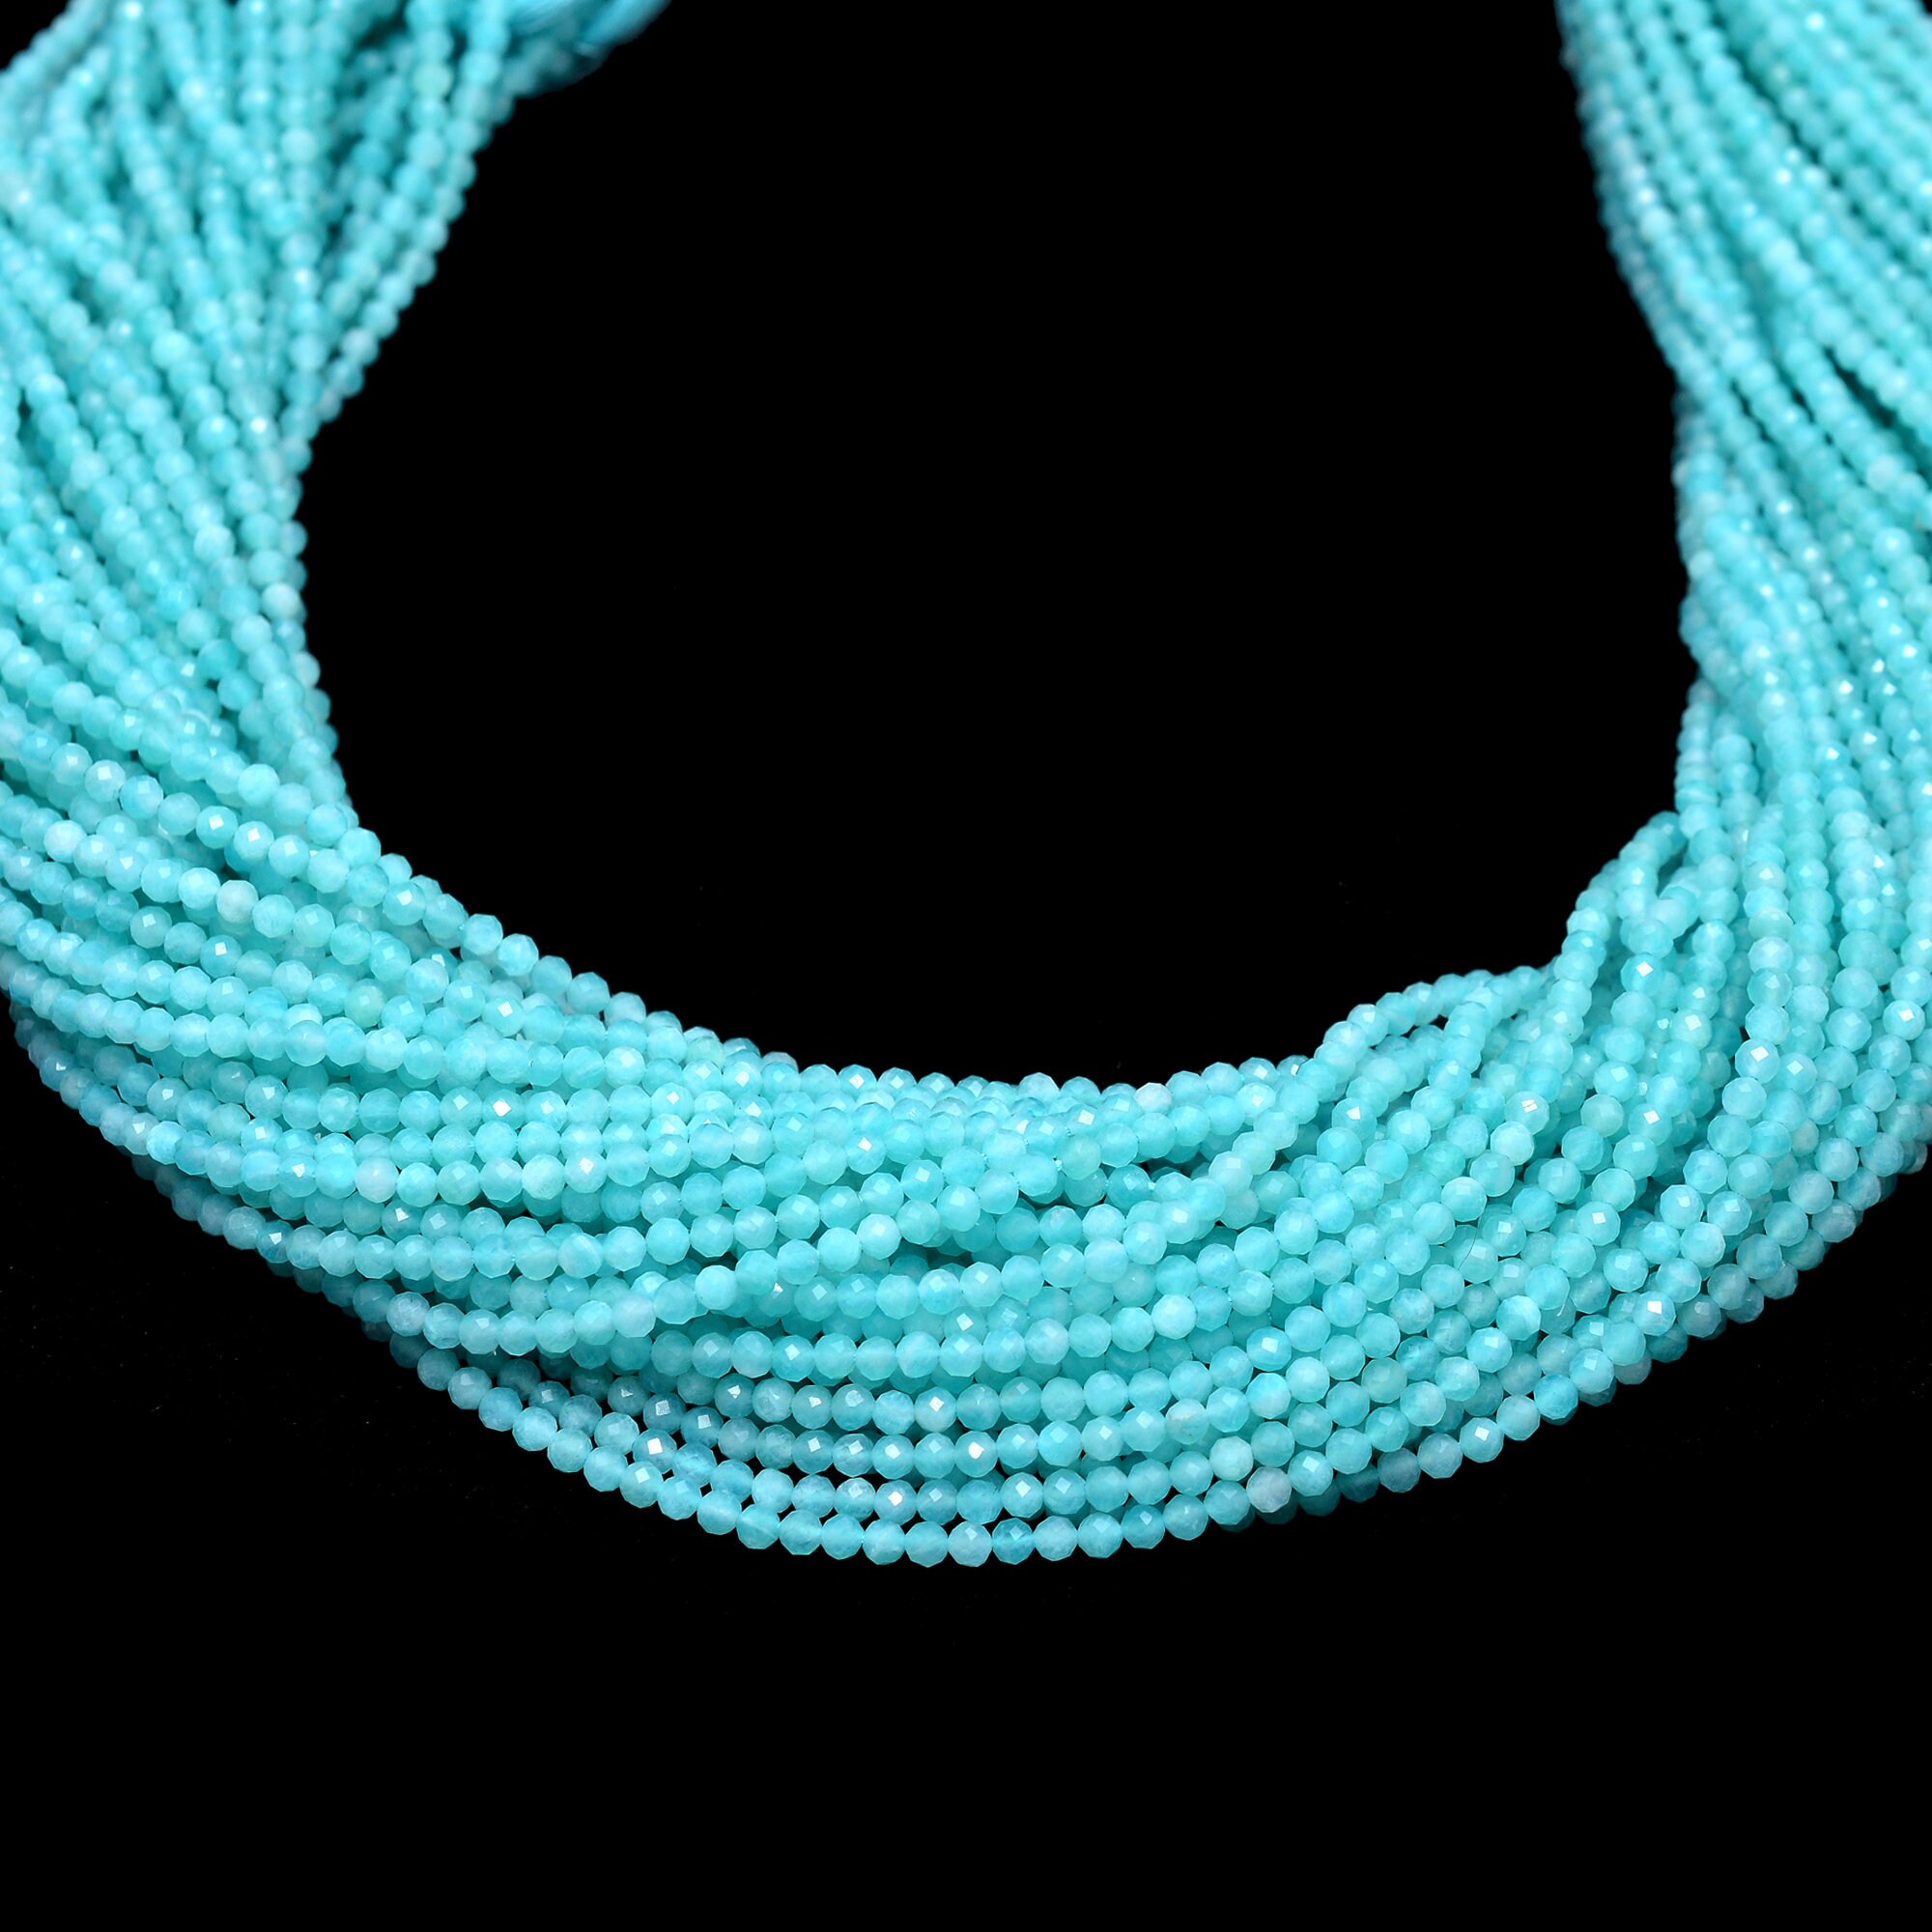 Natural Amazonite 2mm-3mm Rondelle Beads | 13" Strand | Aaa+ Amazonite Semi Precious Gemstone Micro Faceted Loose Beads For Jewelry Making